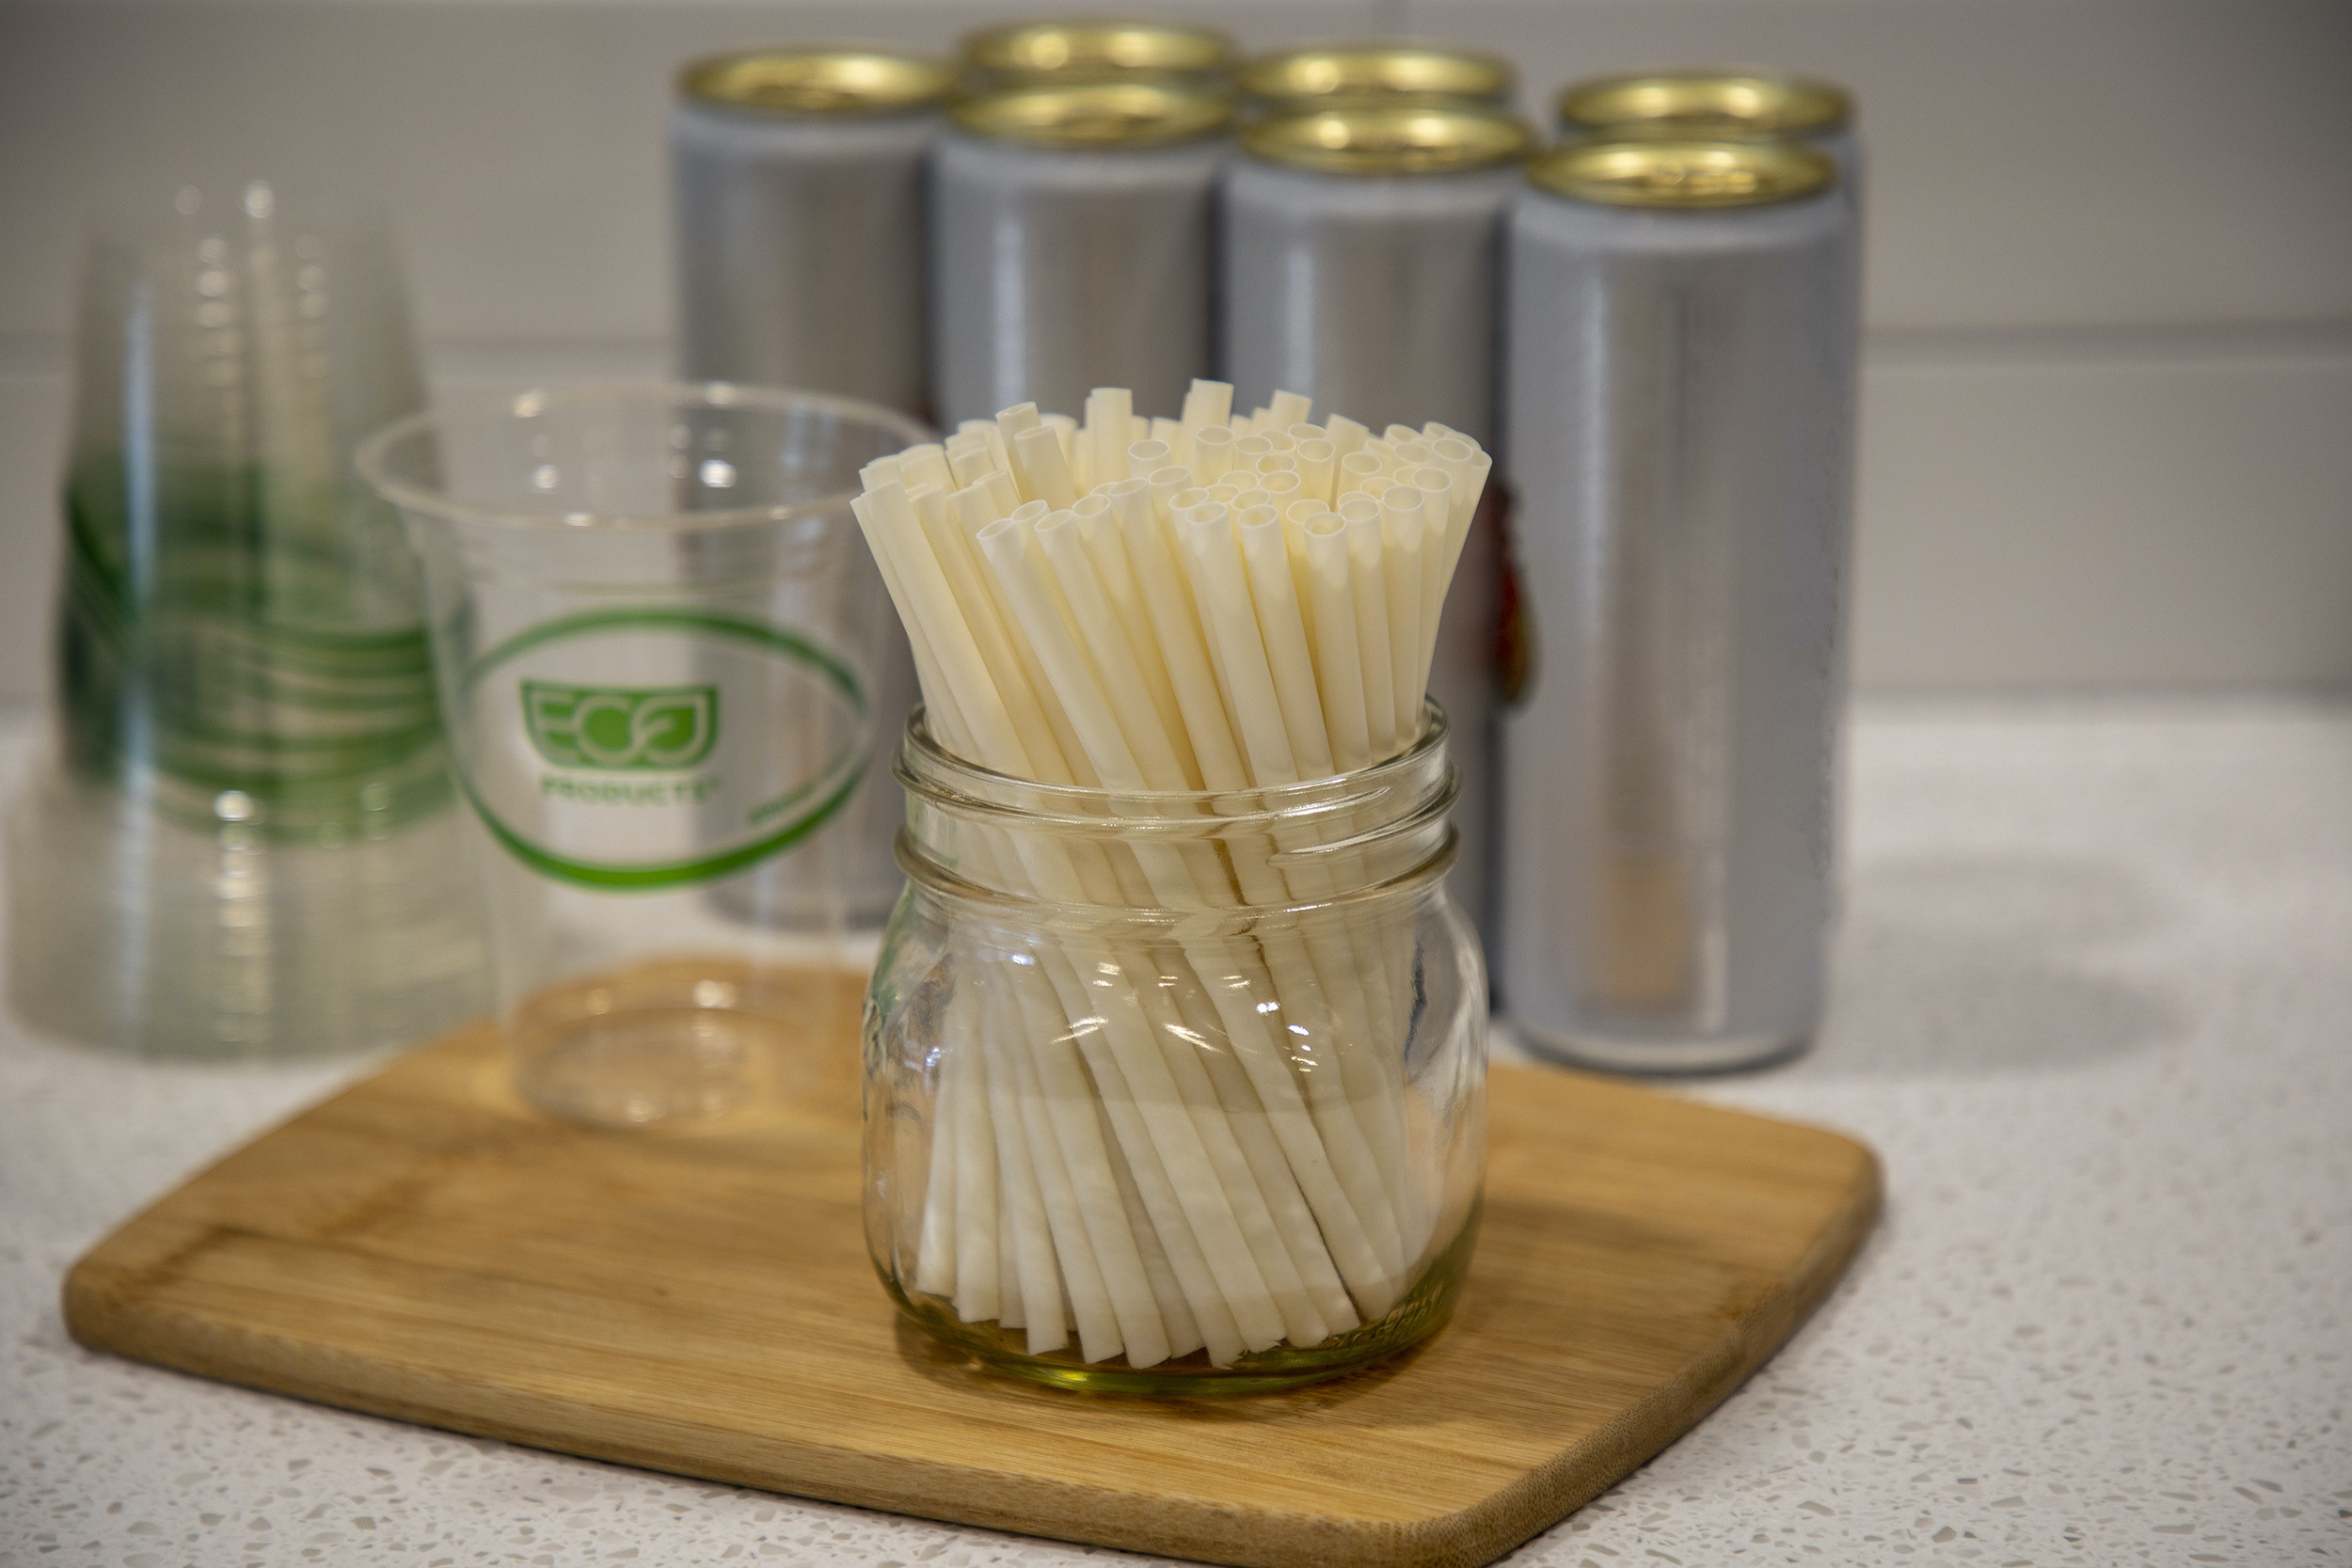 Eco-Products is introducing a new line of compostable straws made from plant-based plastic and as durable as conventional straws. The new straws are able to biodegrade in a commercial compost facility or a home compost pile. 'With demand rising for more sustainable choices, we are committed to offering the best in compostable products,' says Nicole Tariku, Director of Product Development for Eco-Products.